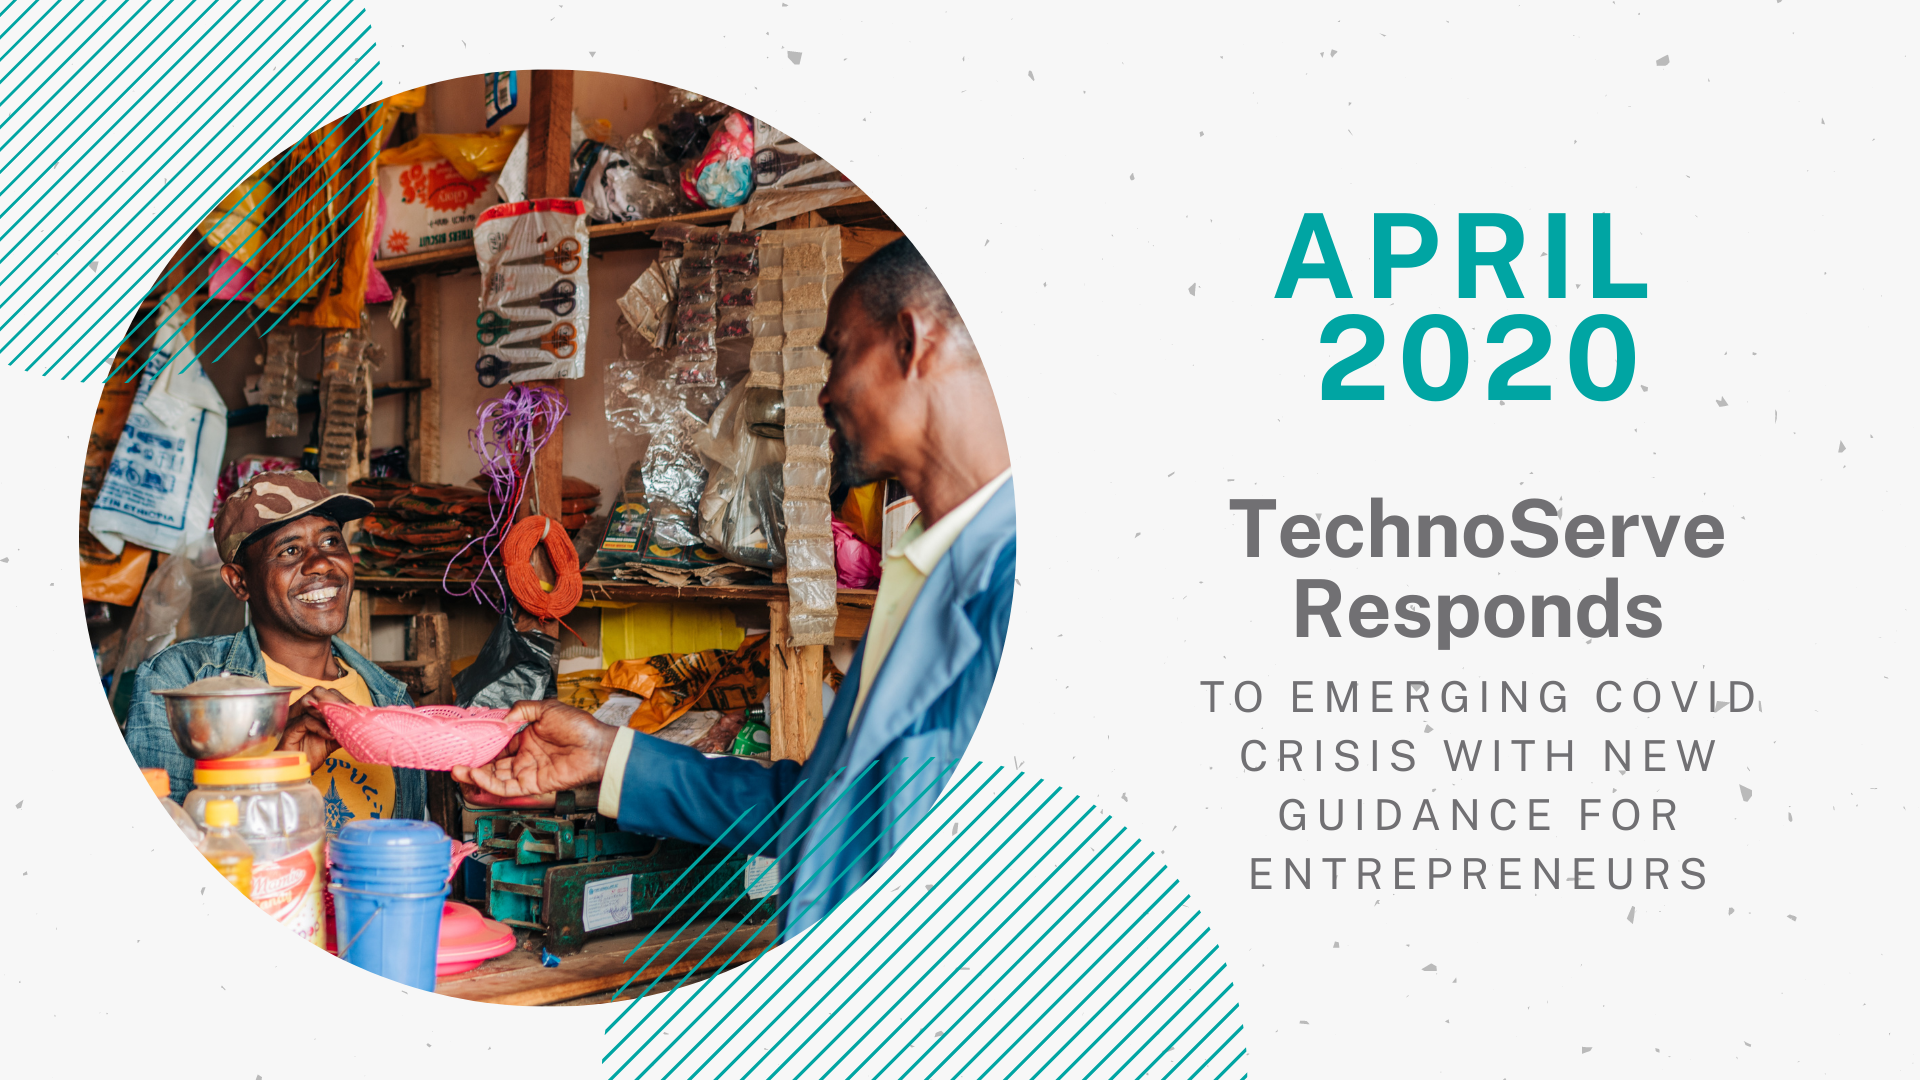 ”April” Graphic for TechnoServe’s Year in Review 2020 blog. A circular photo on the left side shows two men smiling as a customer makes a purchase from a small retail shop. A teal header at the top of the right column says “April 2020,” above the section title in grey font, “TechnoServe Responds to emerging COVID Crisis with New Guidance for Entrepreneurs.”